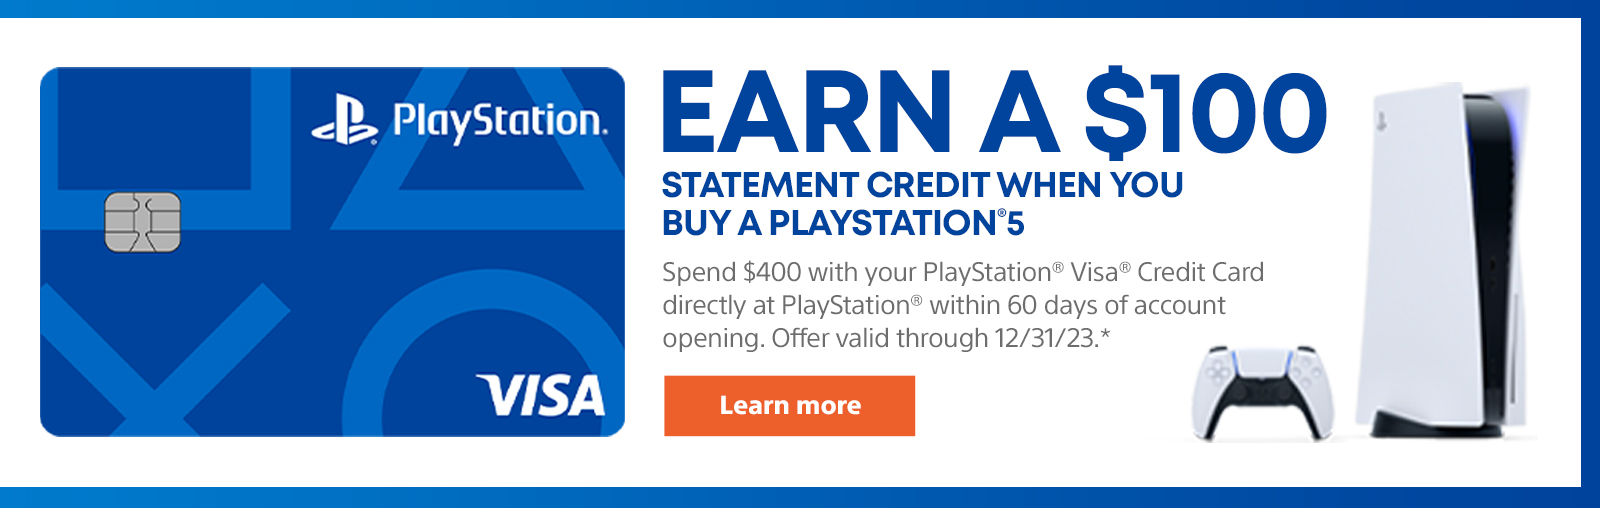 Earn a $100 statement credit when you buy a PlayStation 5. Use the PlayStation Visa Credit Card to spend $400 directly at PlayStation within 60 days of account opening. Offer valid through 12/31/23.